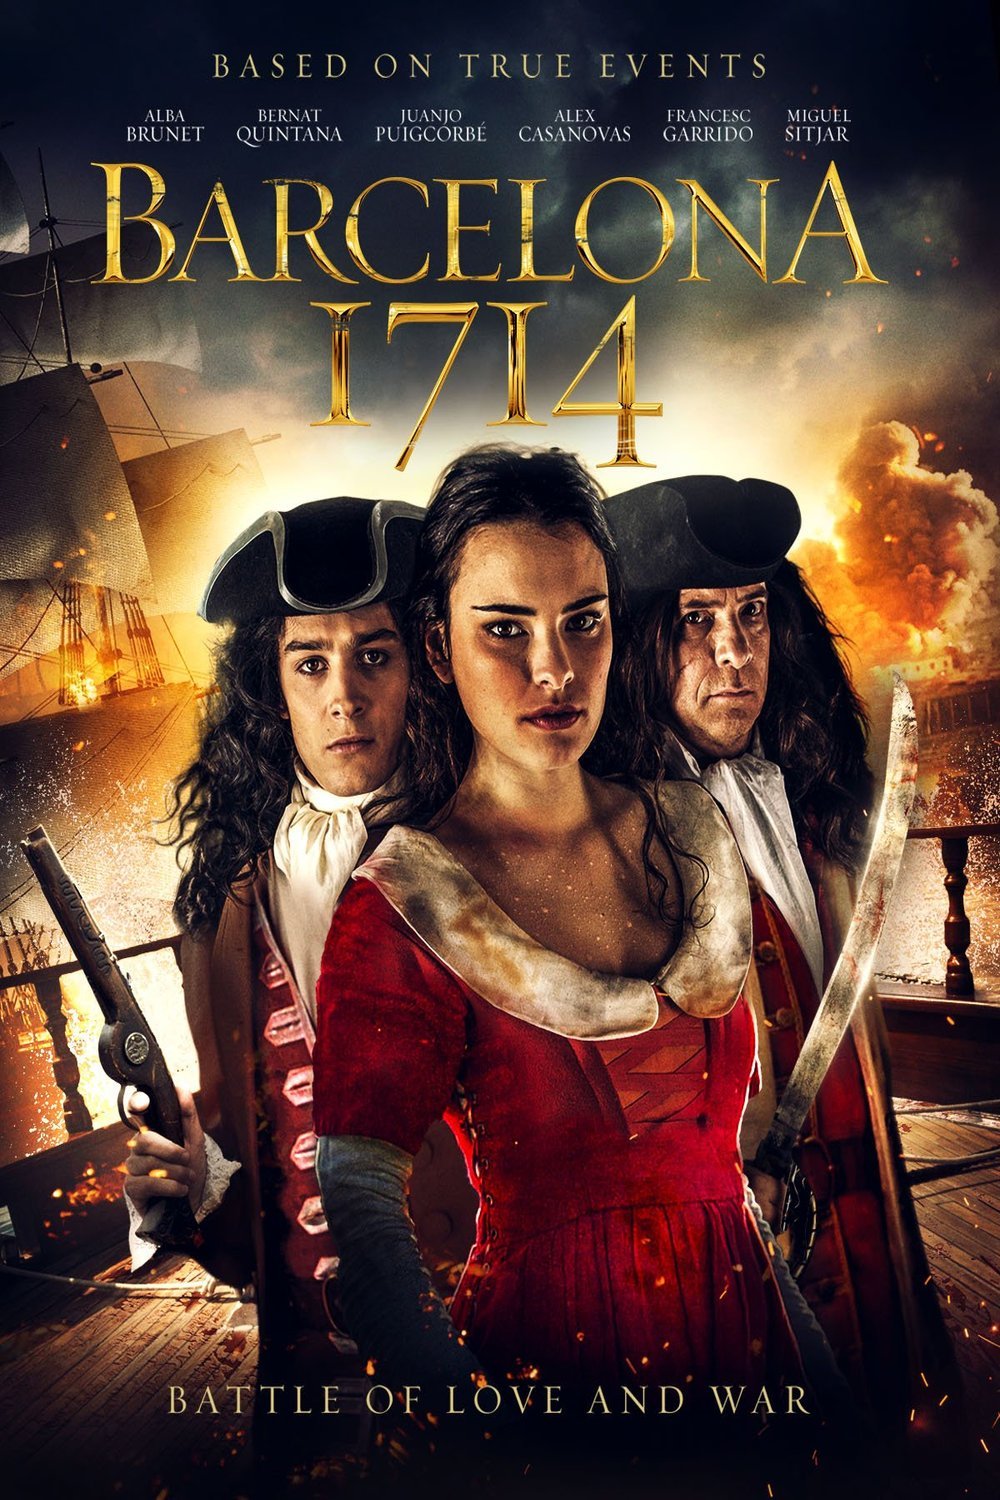 Catalan poster of the movie Barcelona 1714